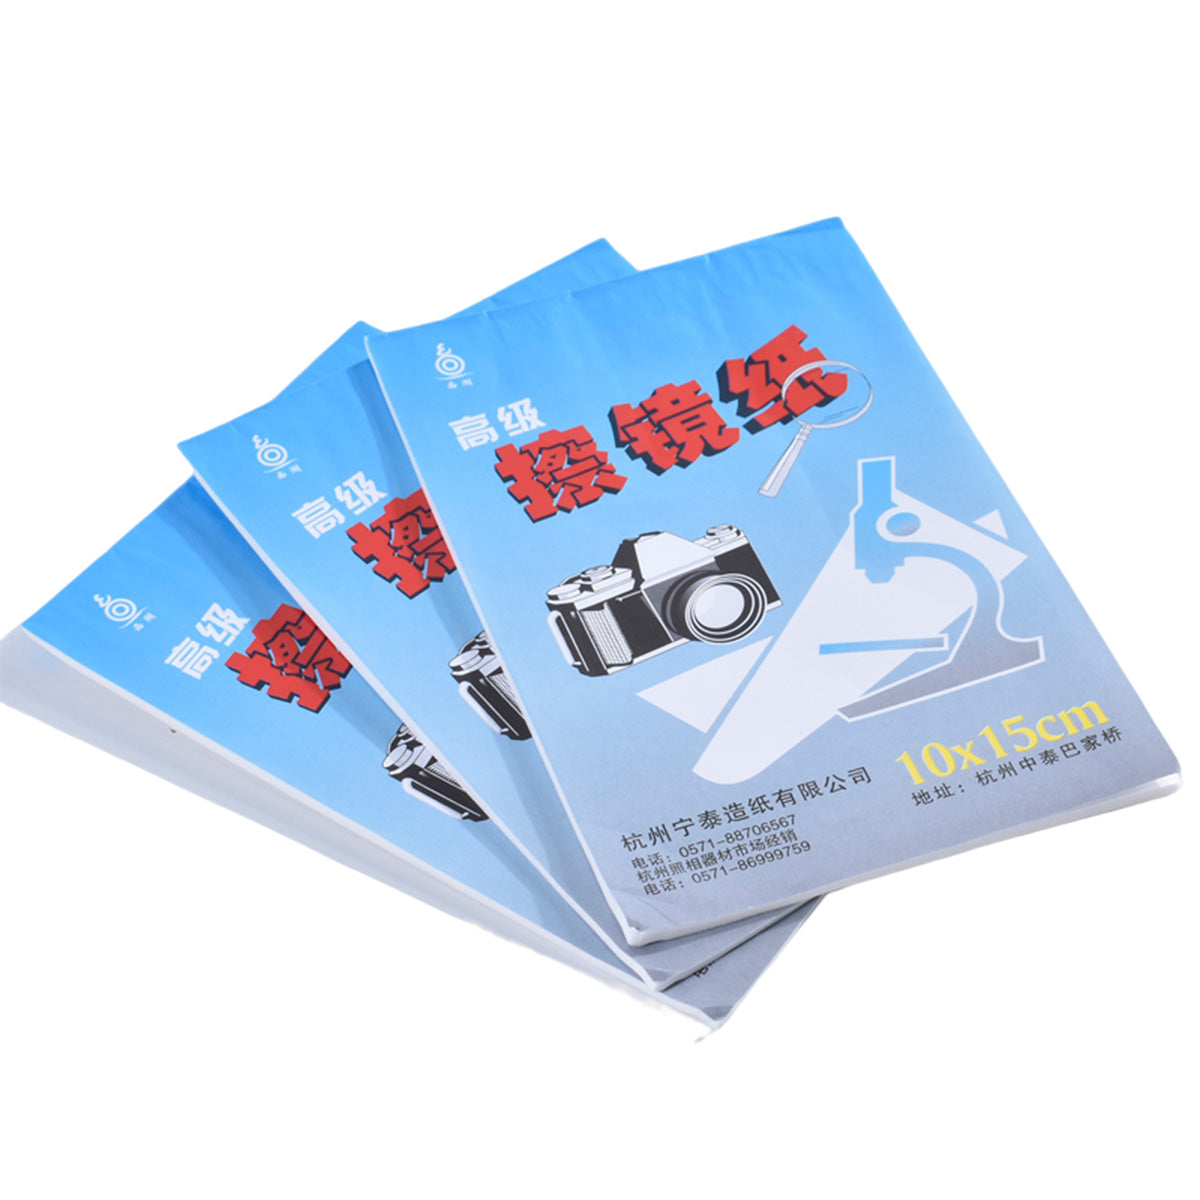 1pc 50 Sheets Optics Lens Tissue Clean Paper Soft Cleaning Wipes Booklet For Camera Microscope Laser Filter Glass